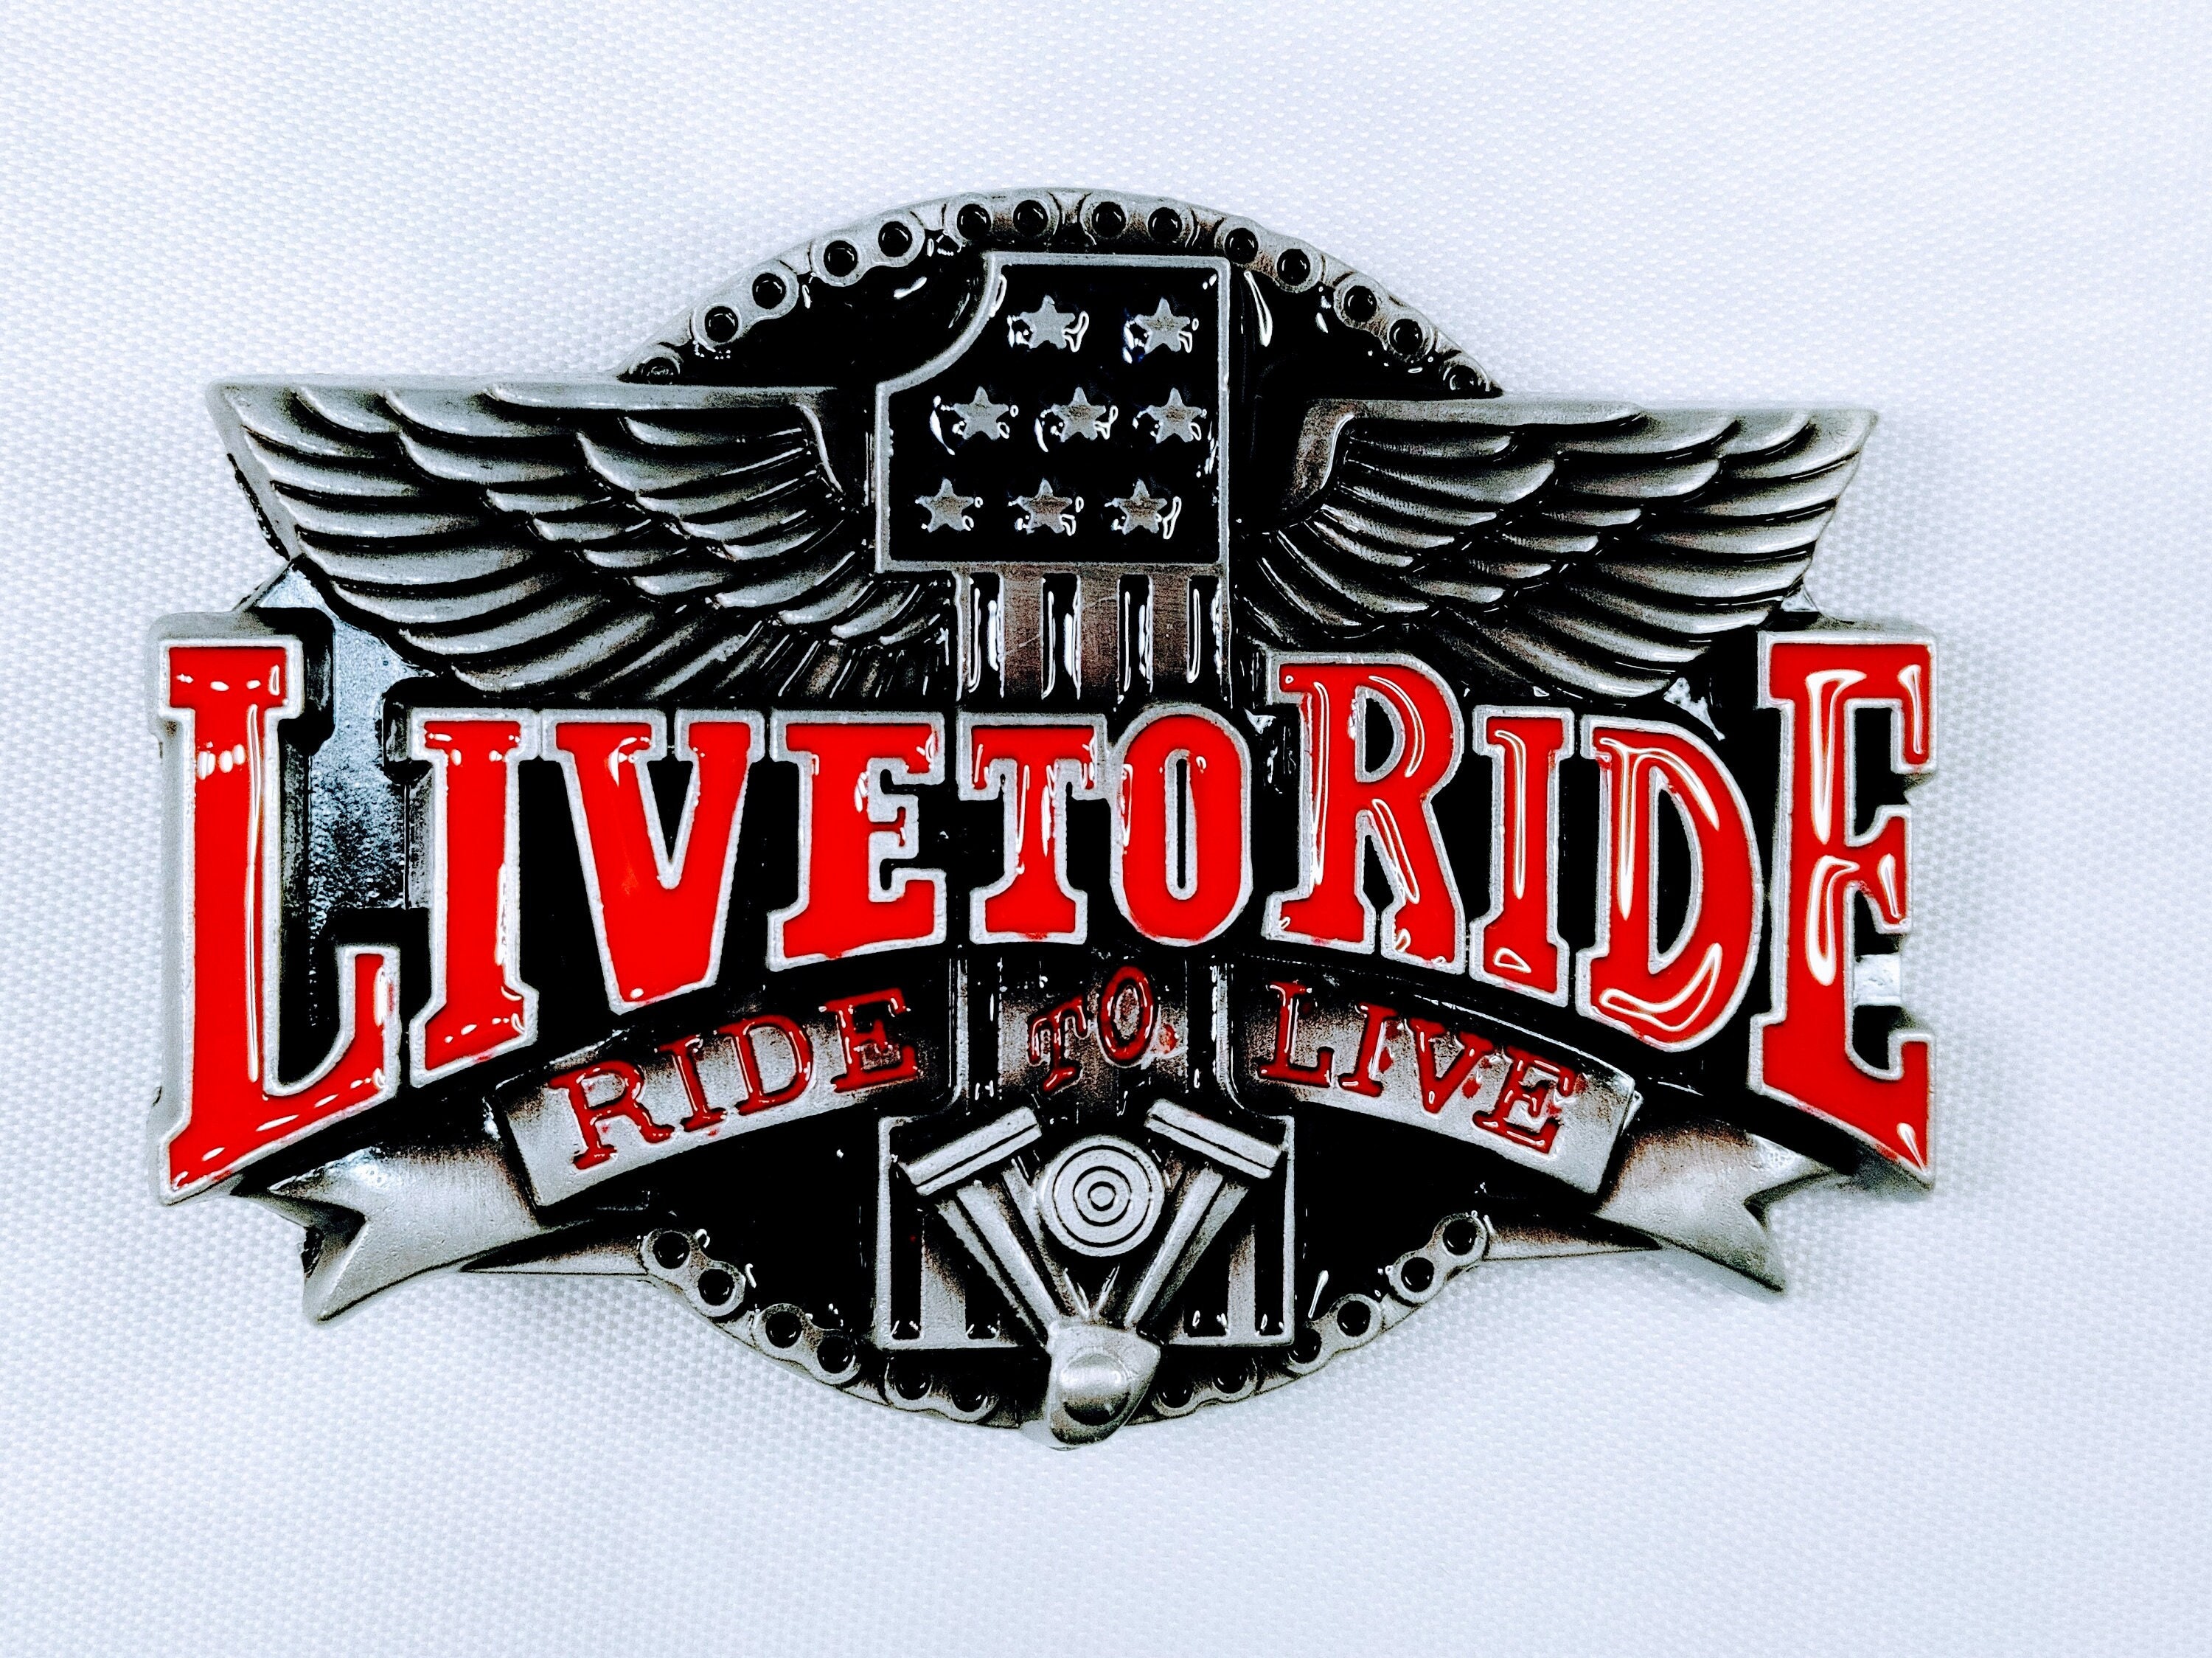 PEWTER AND ENAMEL LIVE TO RIDE EAGLE BELT BUCKLE